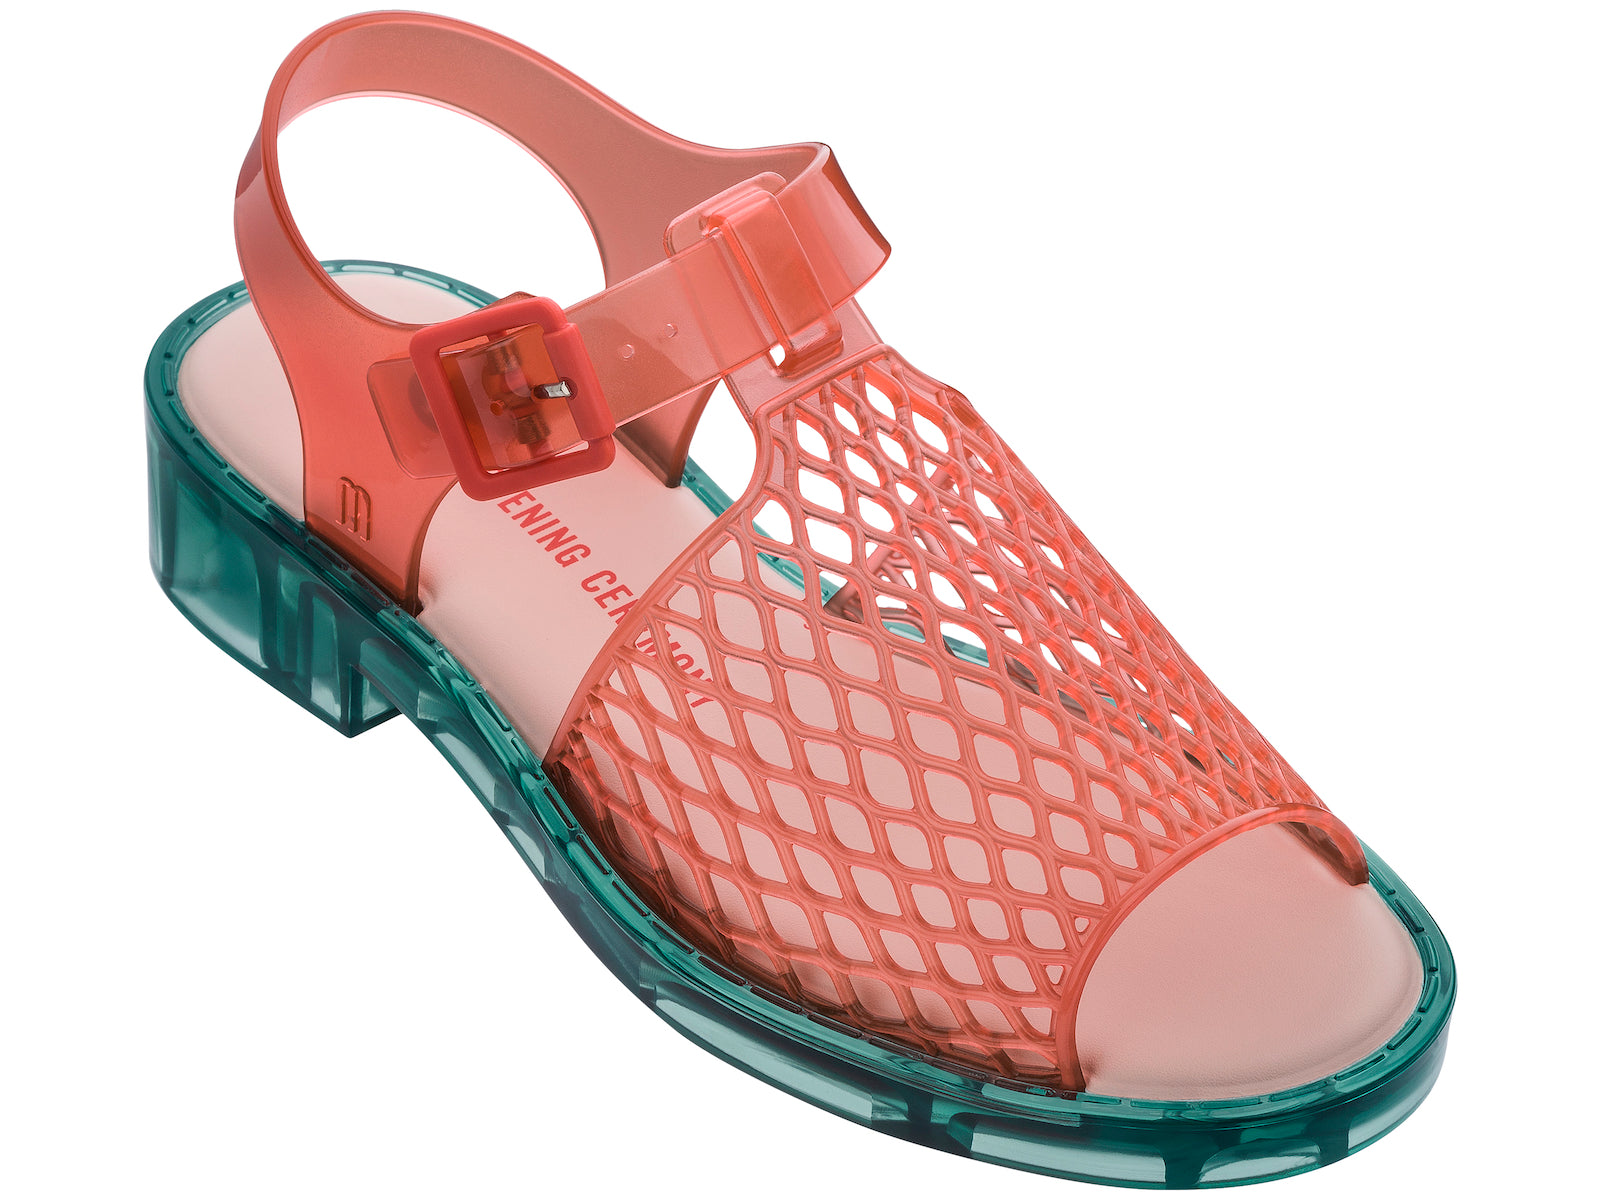 Hatch Melissa + Opening Ceremony Sandal - Green/Red